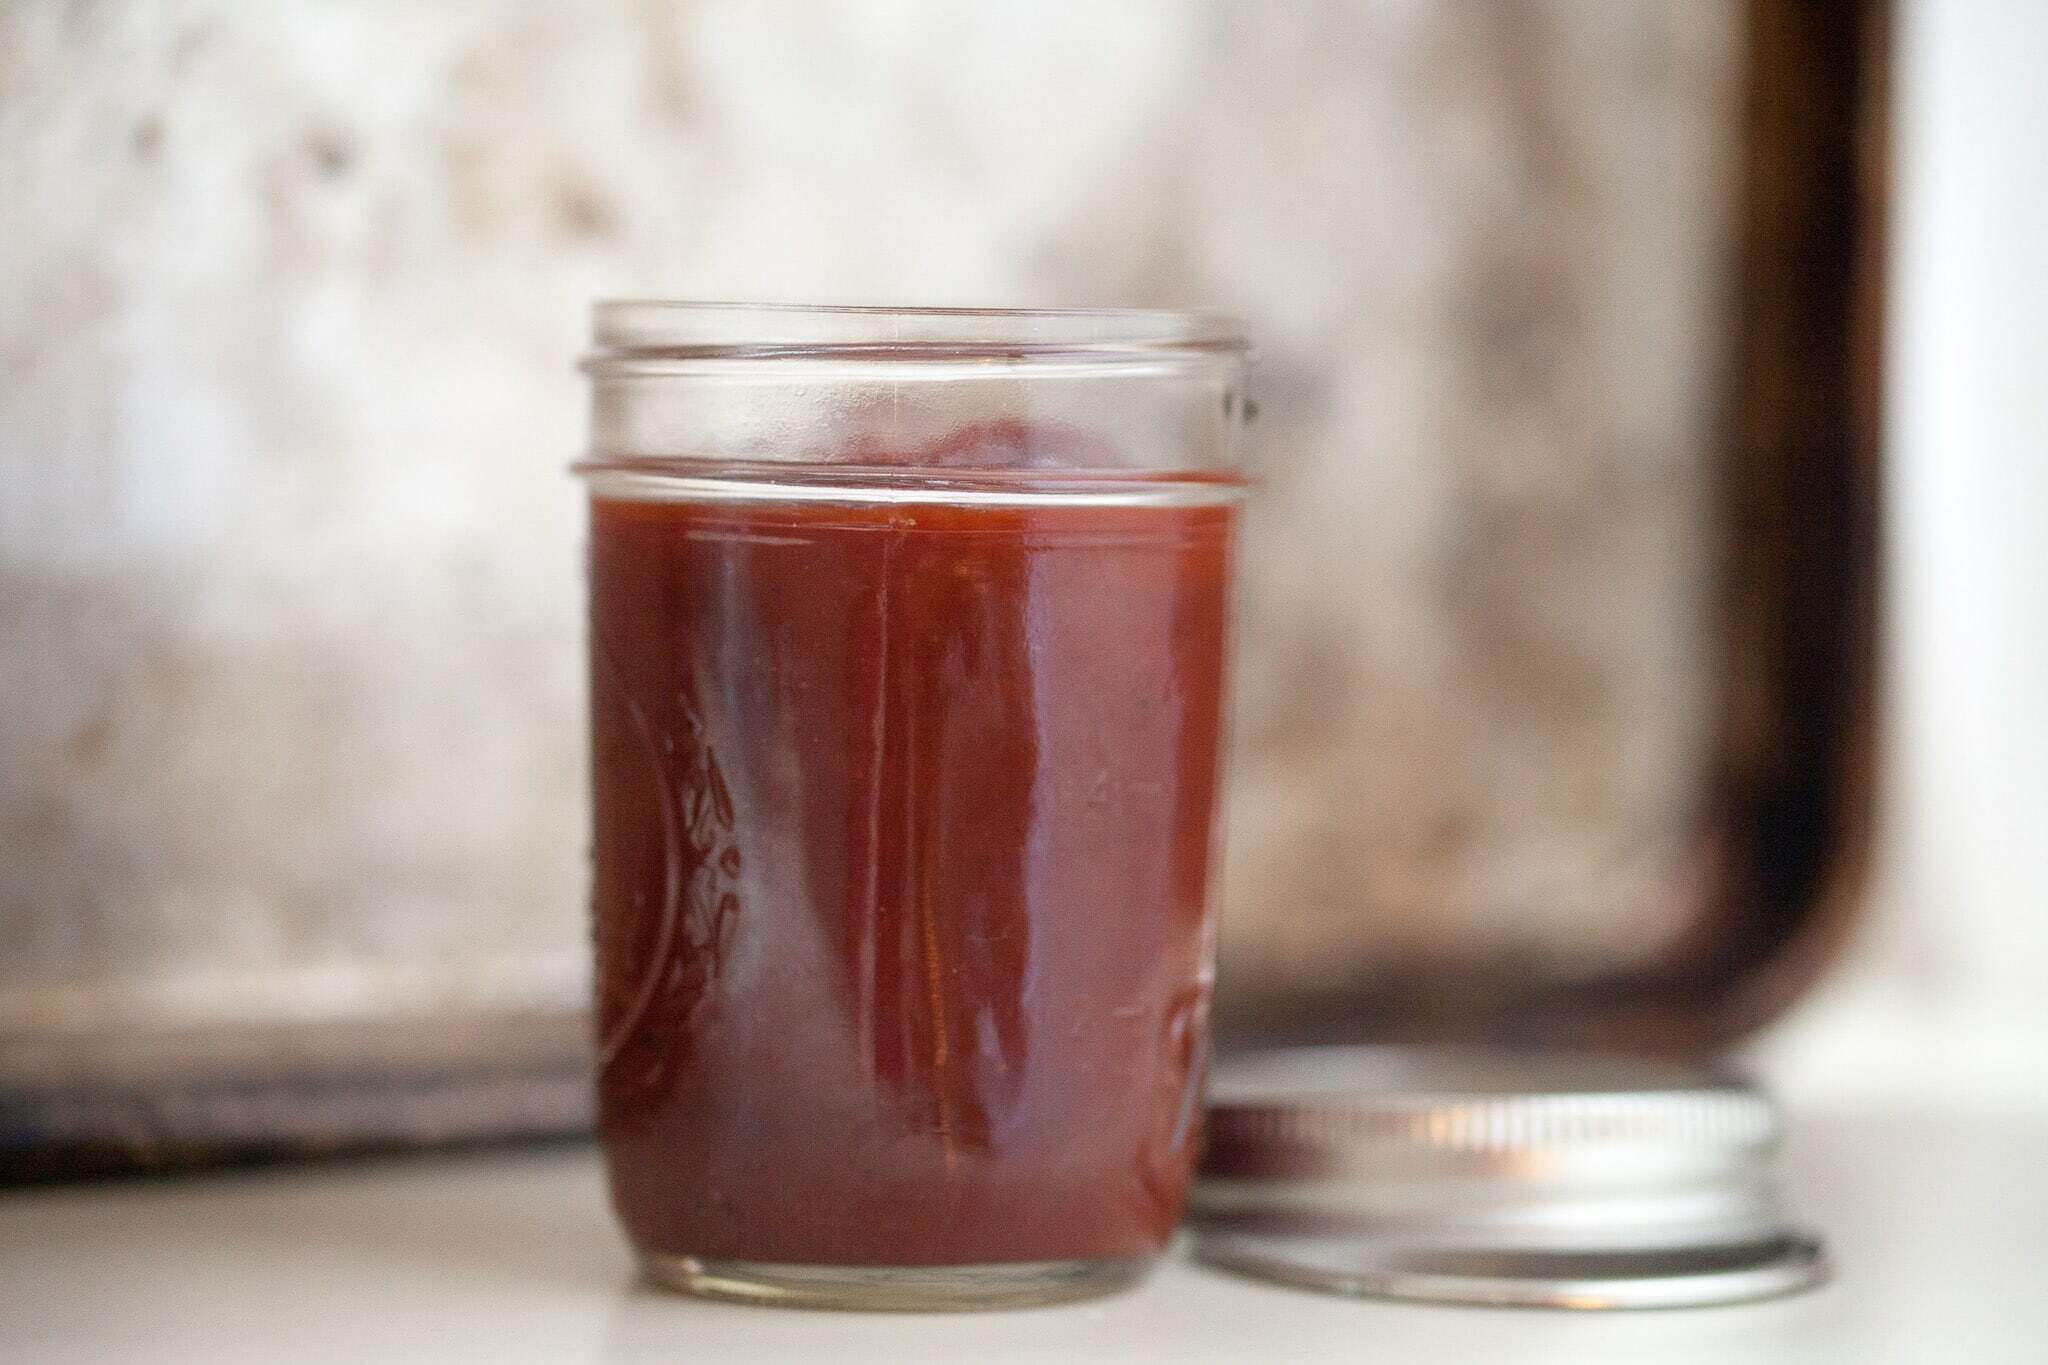 How to make tasty sauces at home by understanding how emulsions work